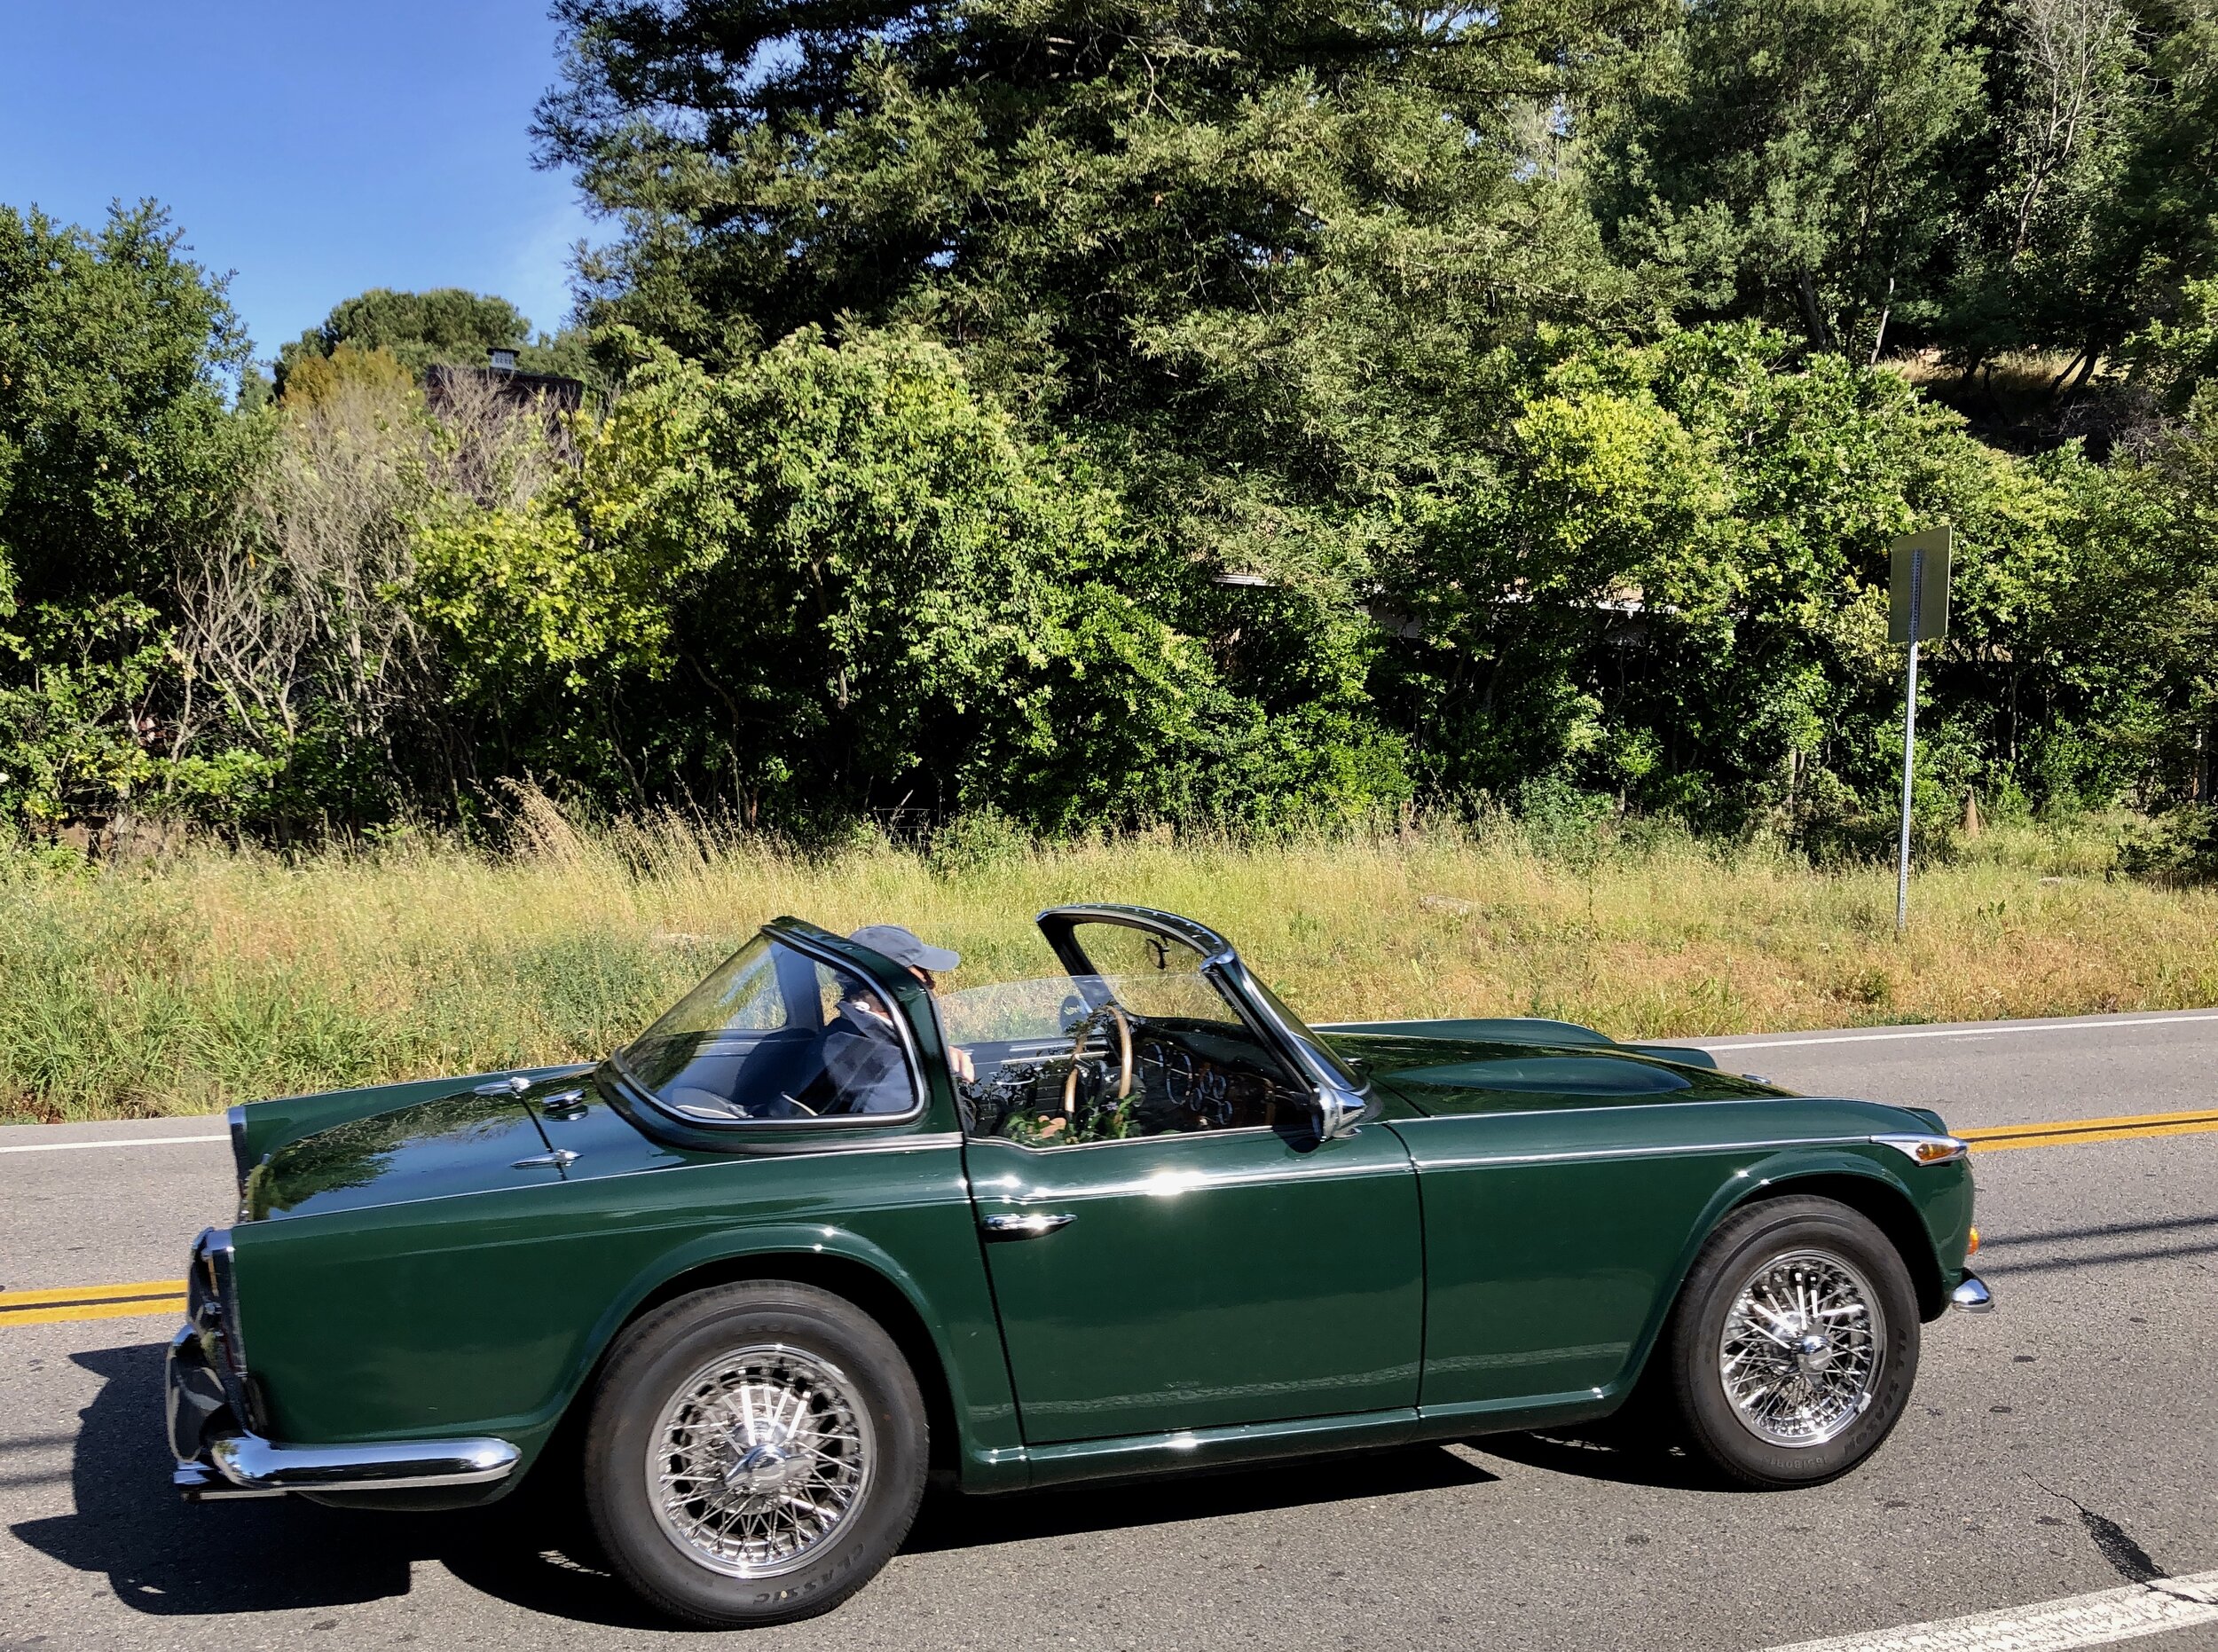 The lure of the open road in a vintage Triumph.